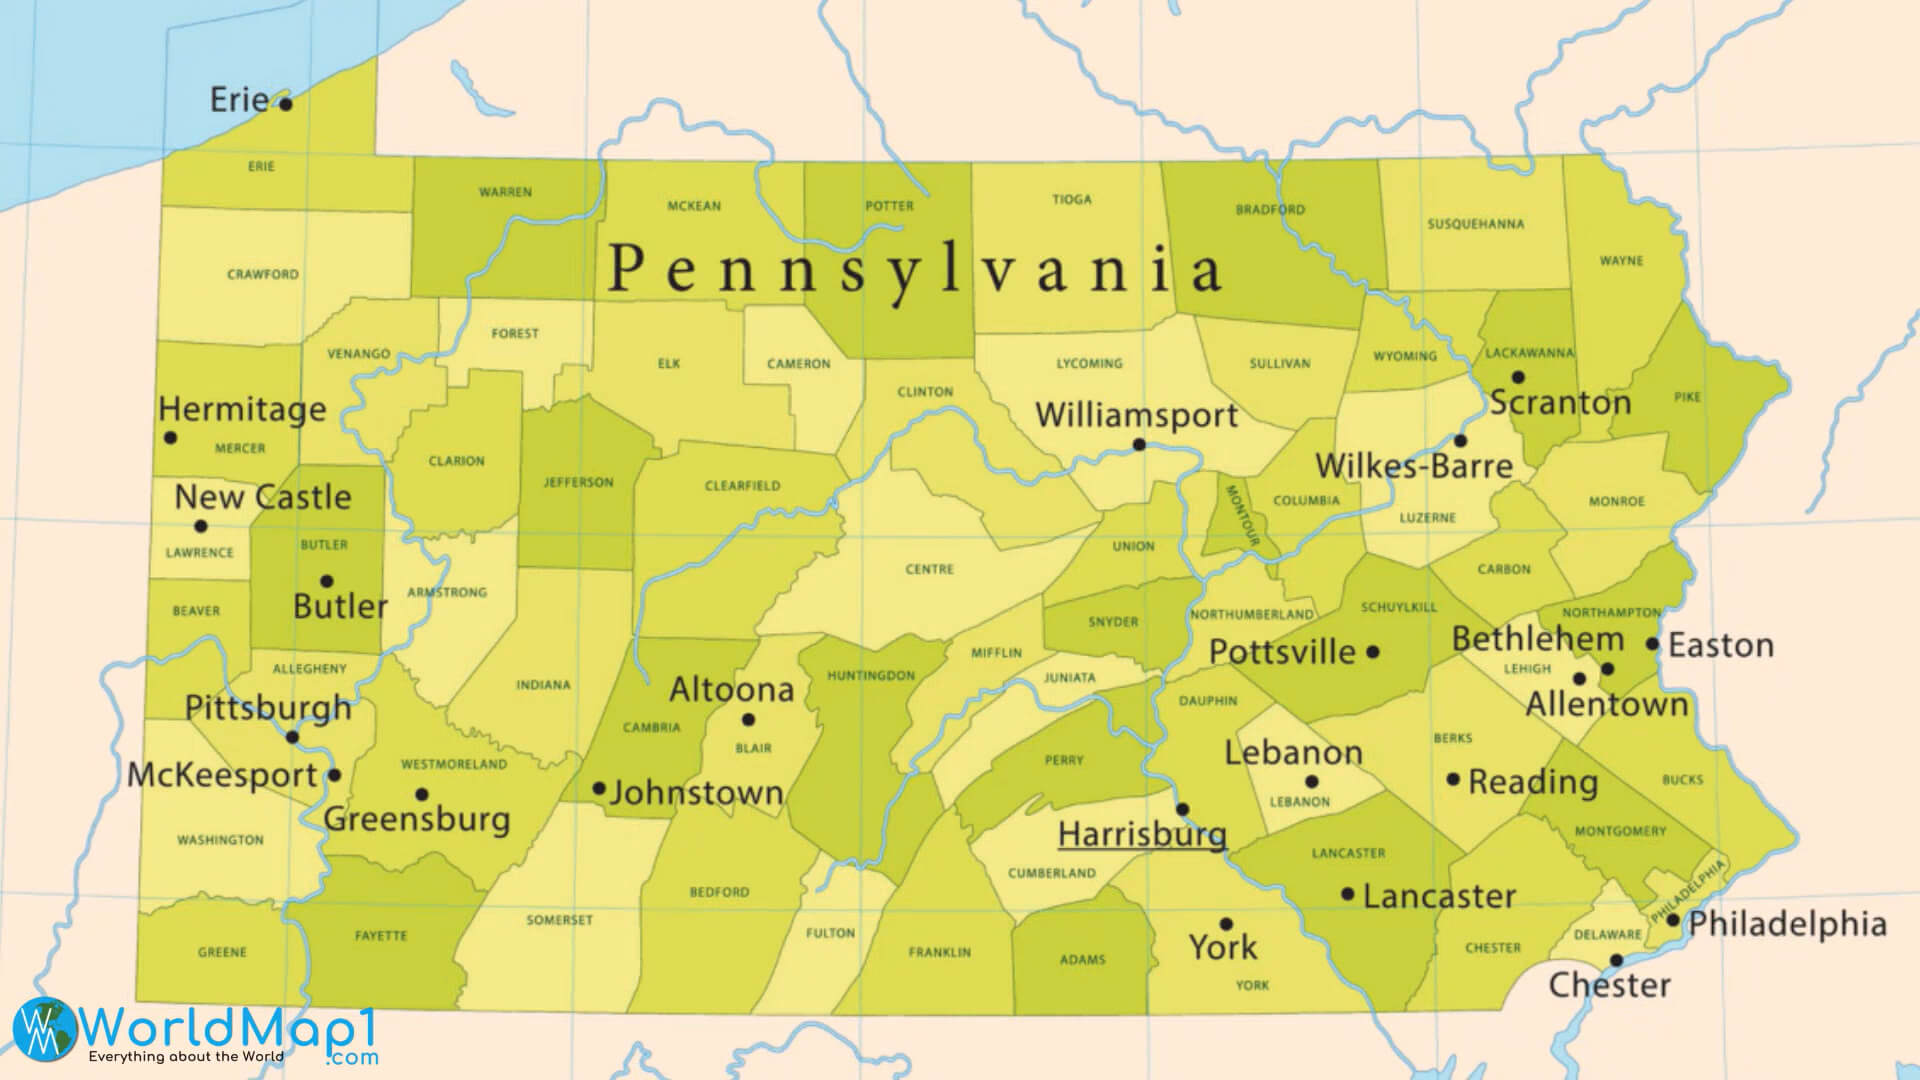 Pennsylvania Main Cities and Counties Map